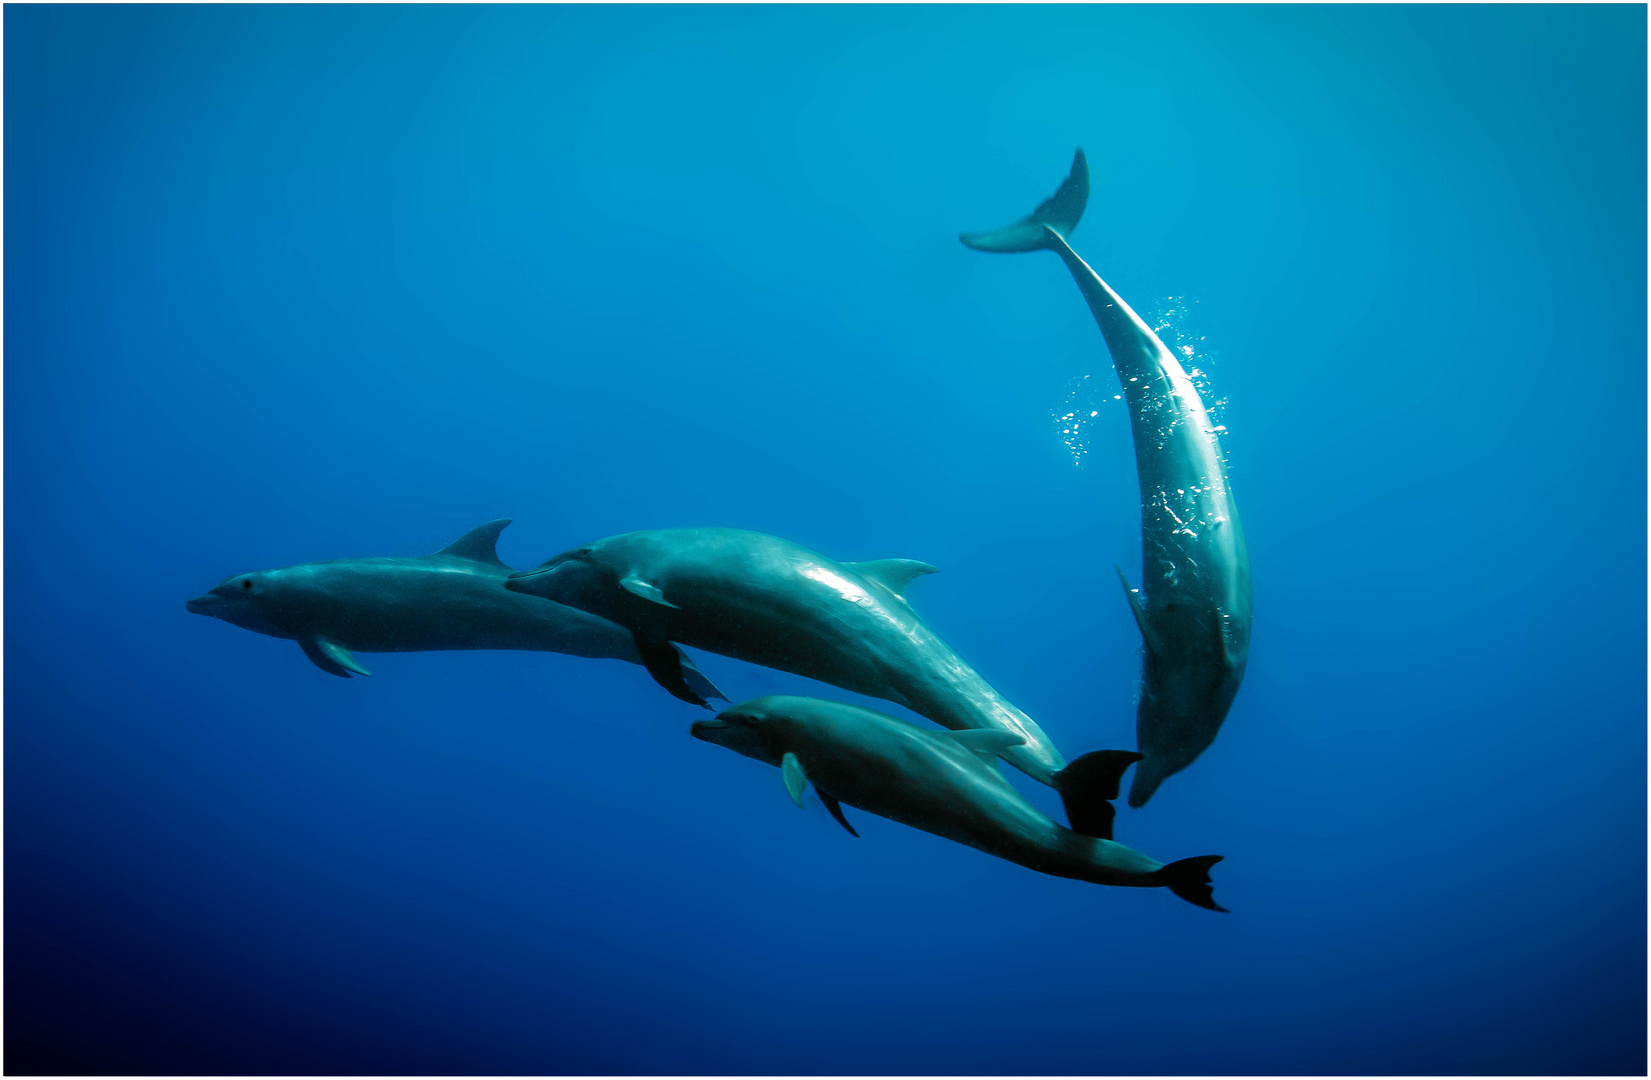 Dancing Dolphins